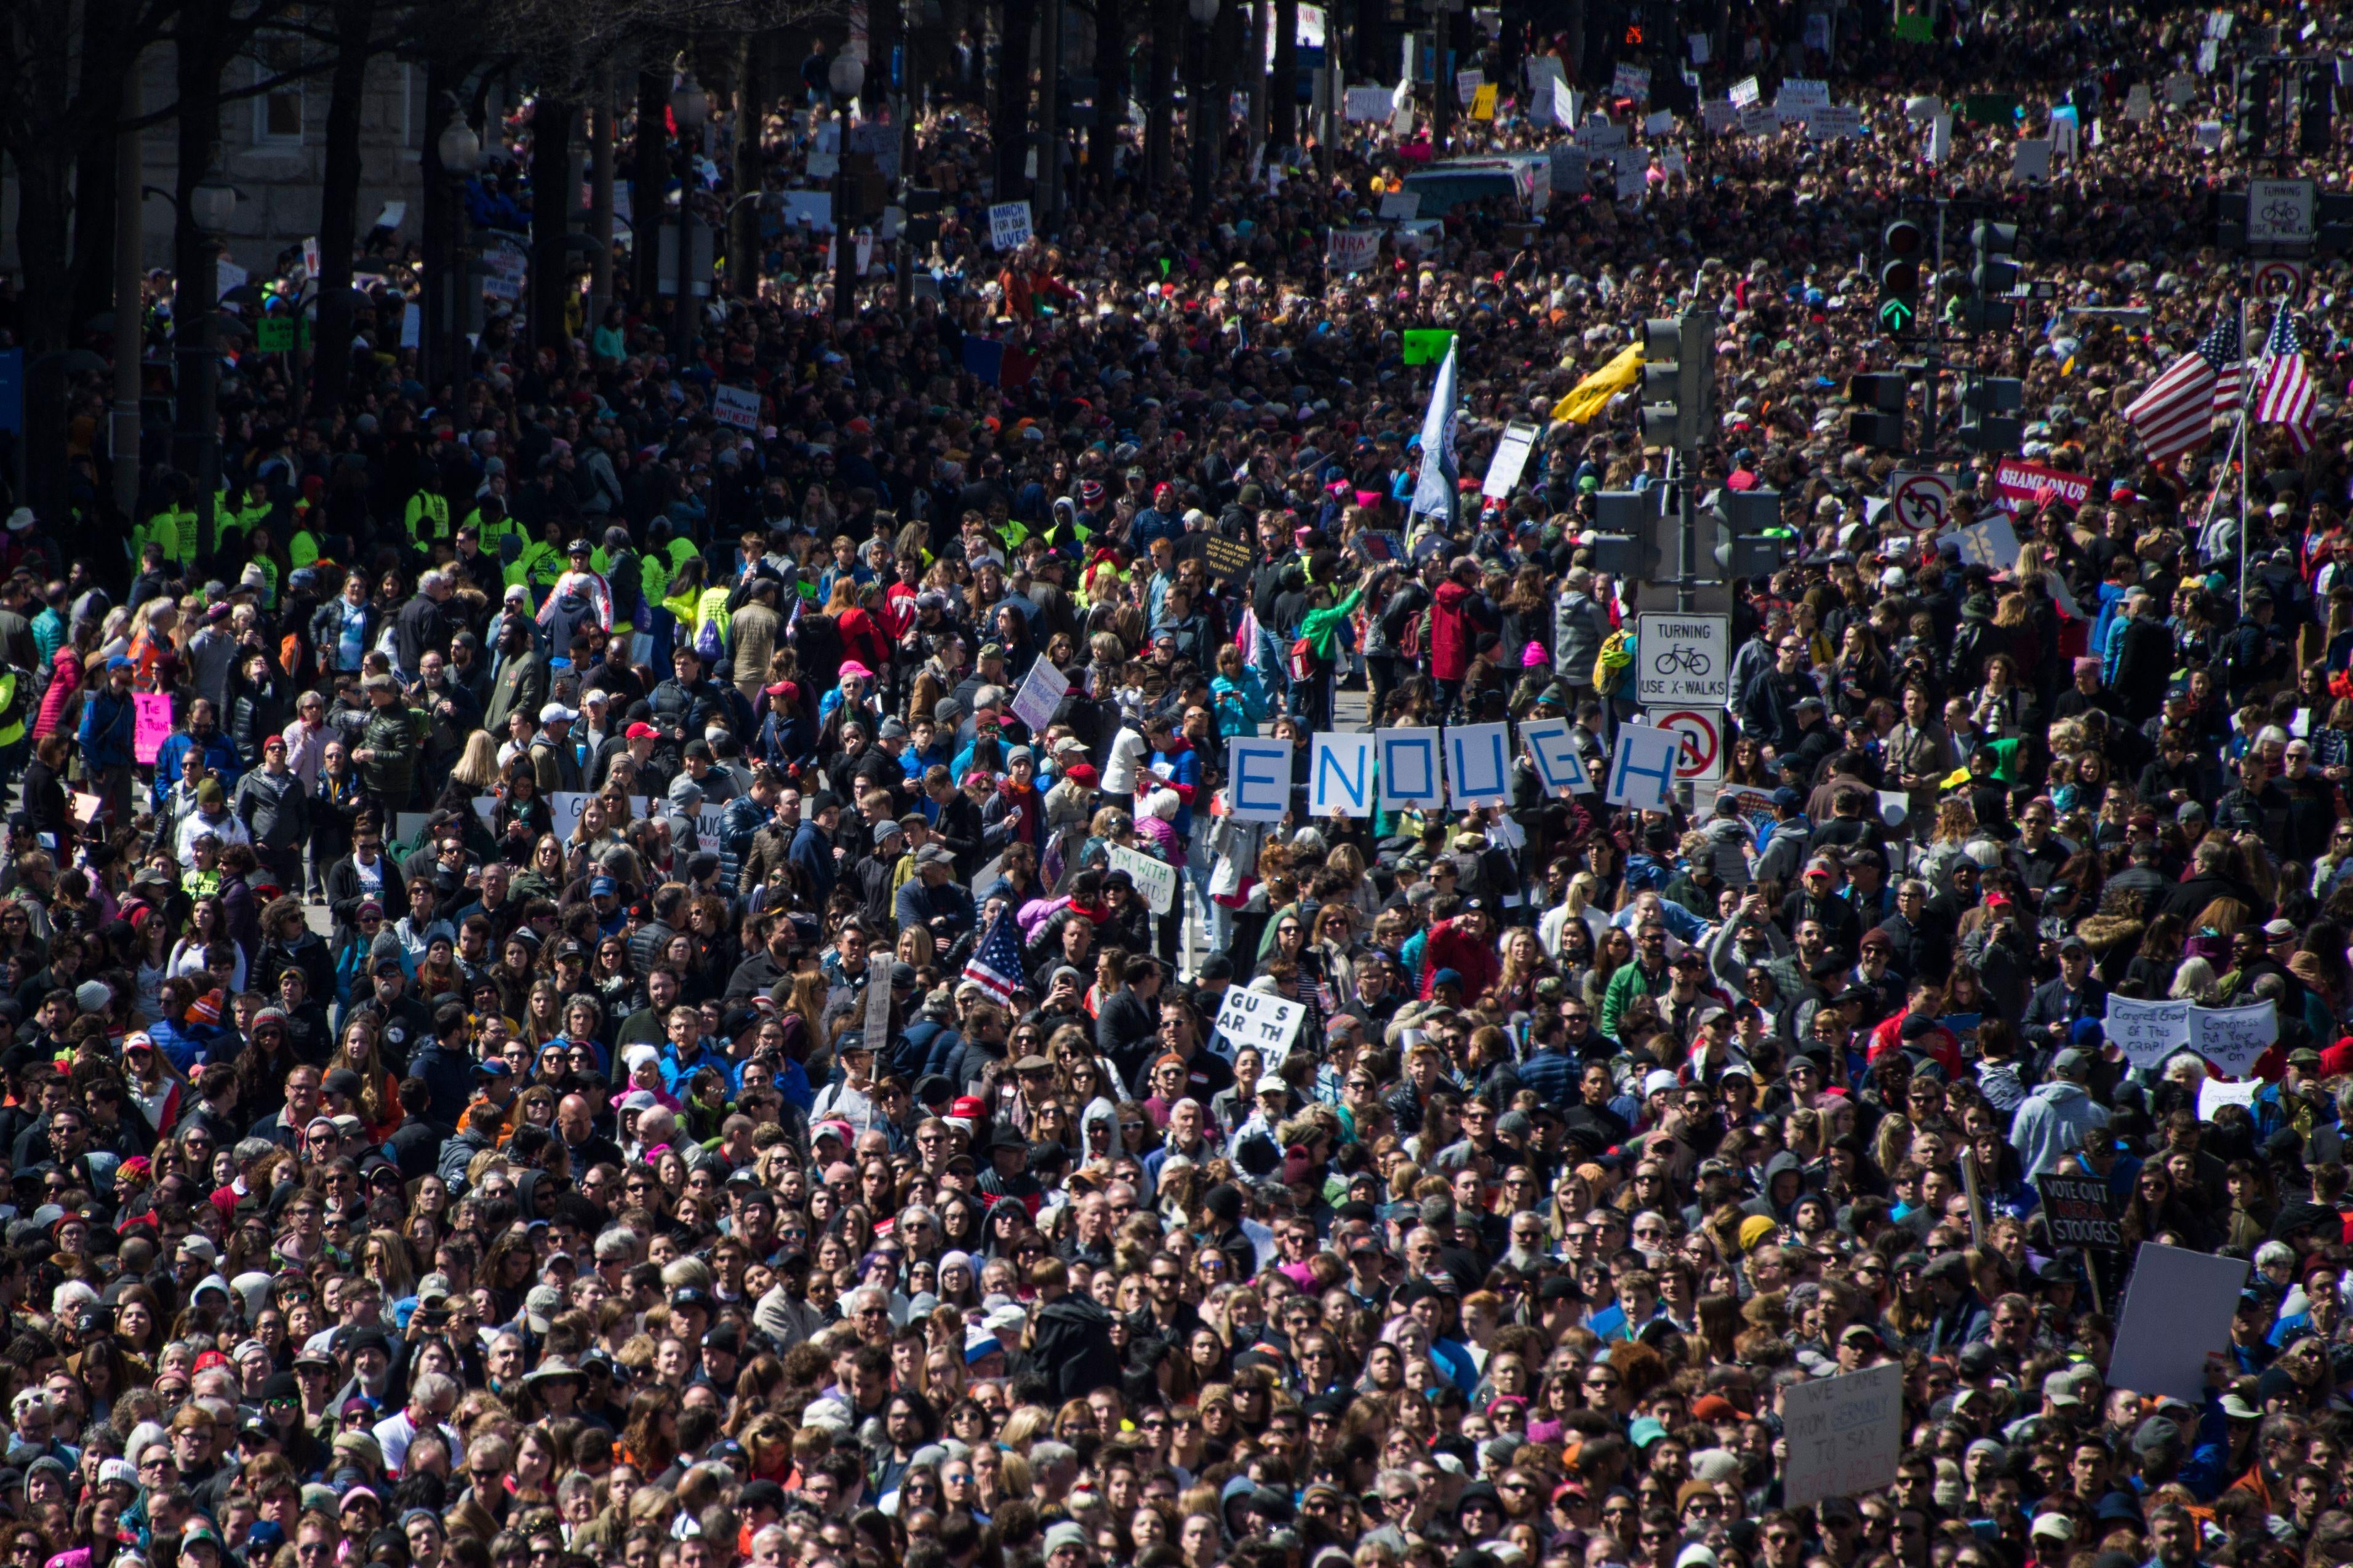 People gather during the March for Our Lives Rally in Washington, DC on March 24, 2018.